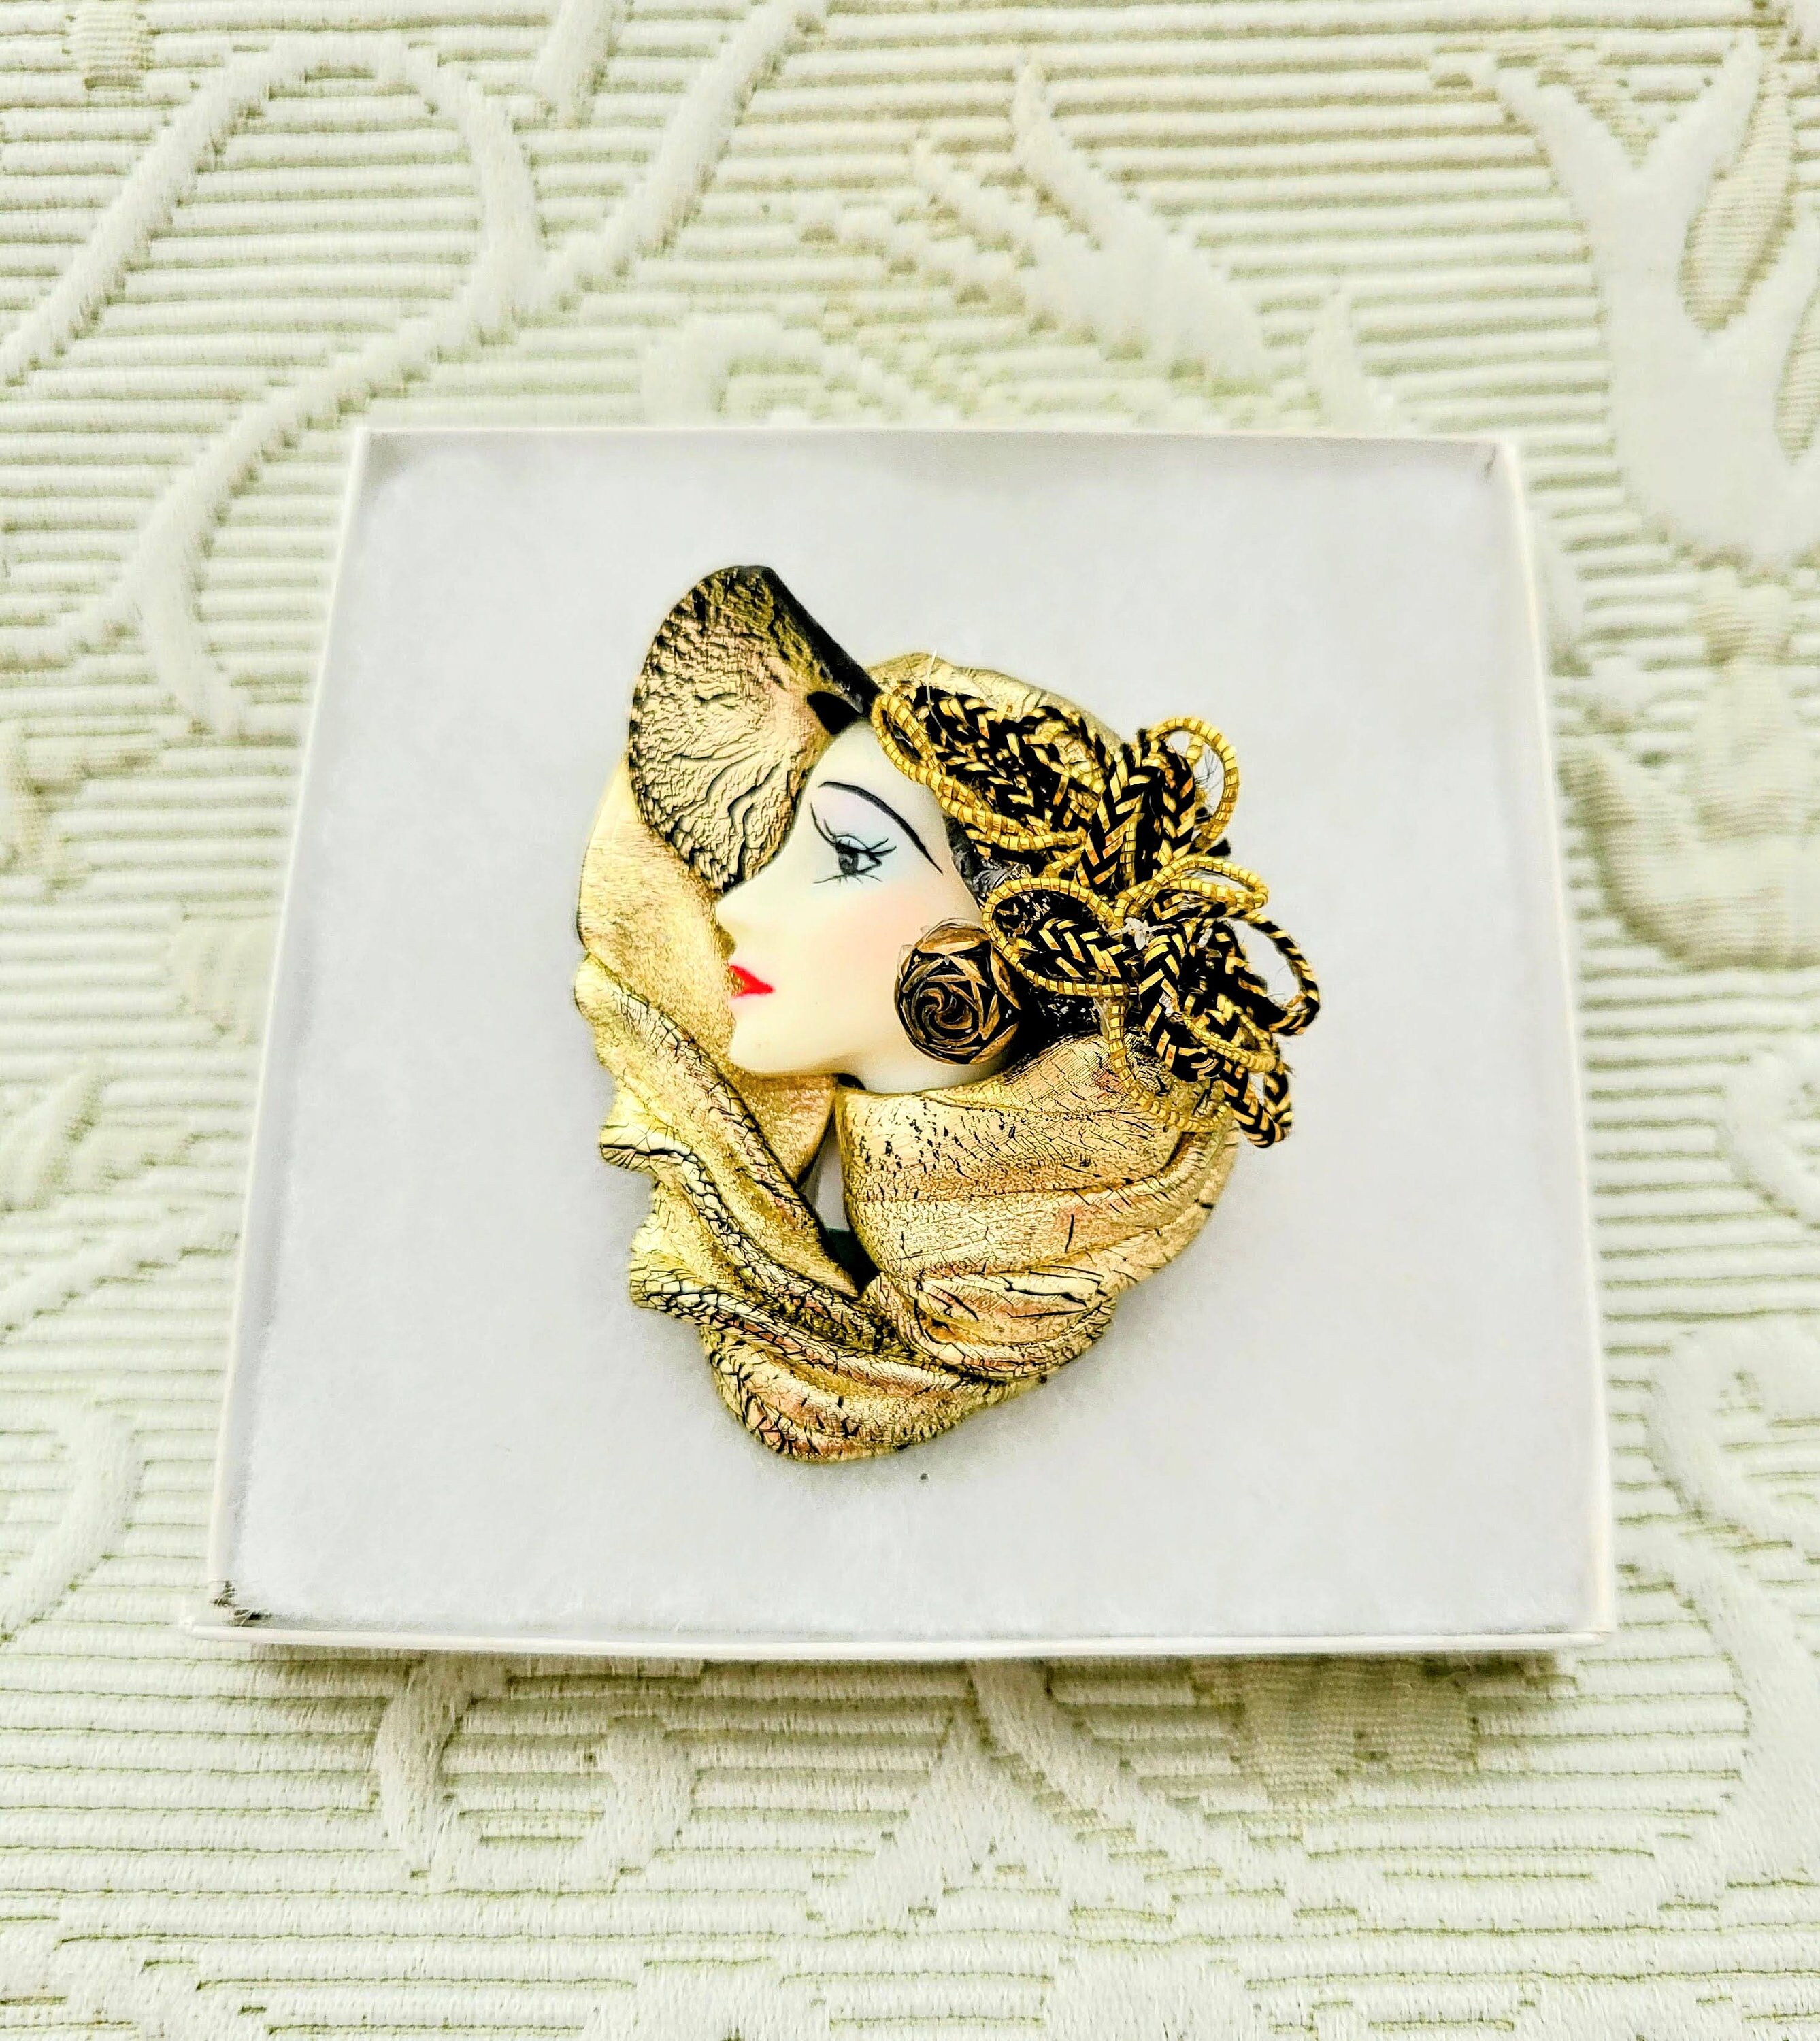 Manly Woman Face Pin for Sale by Tribloom